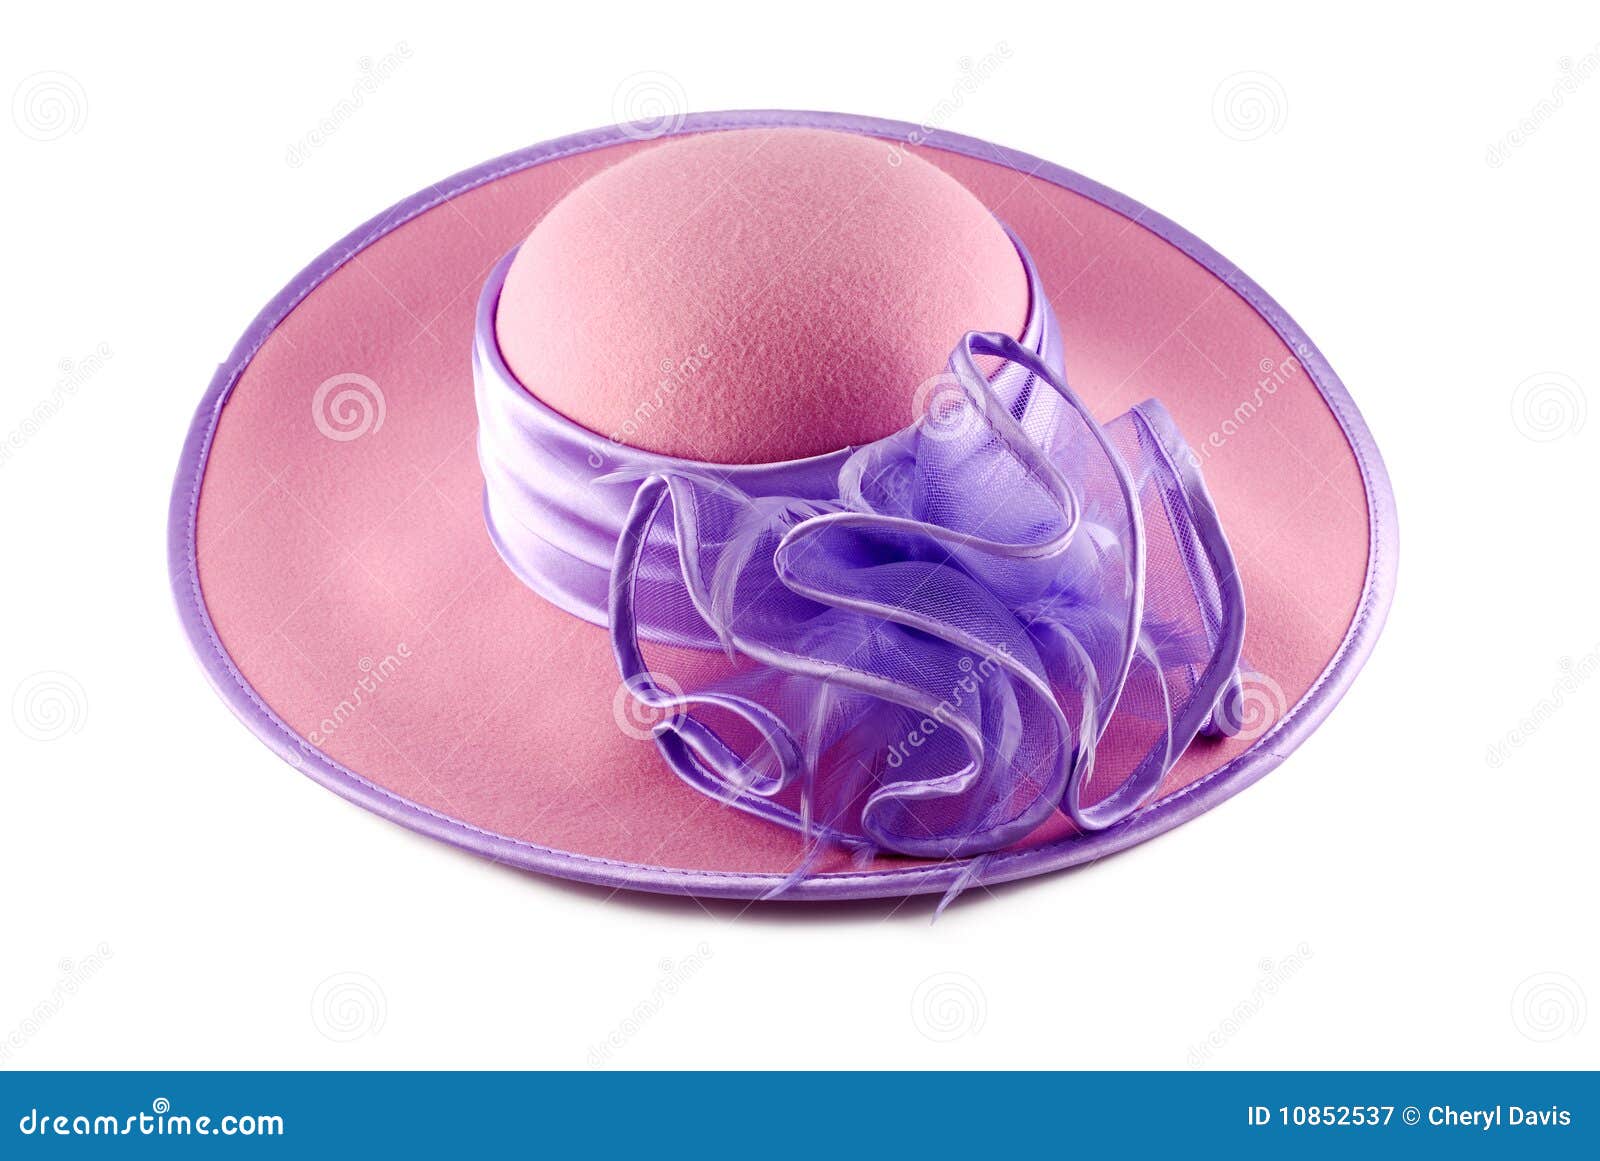 clipart easter hats - photo #36